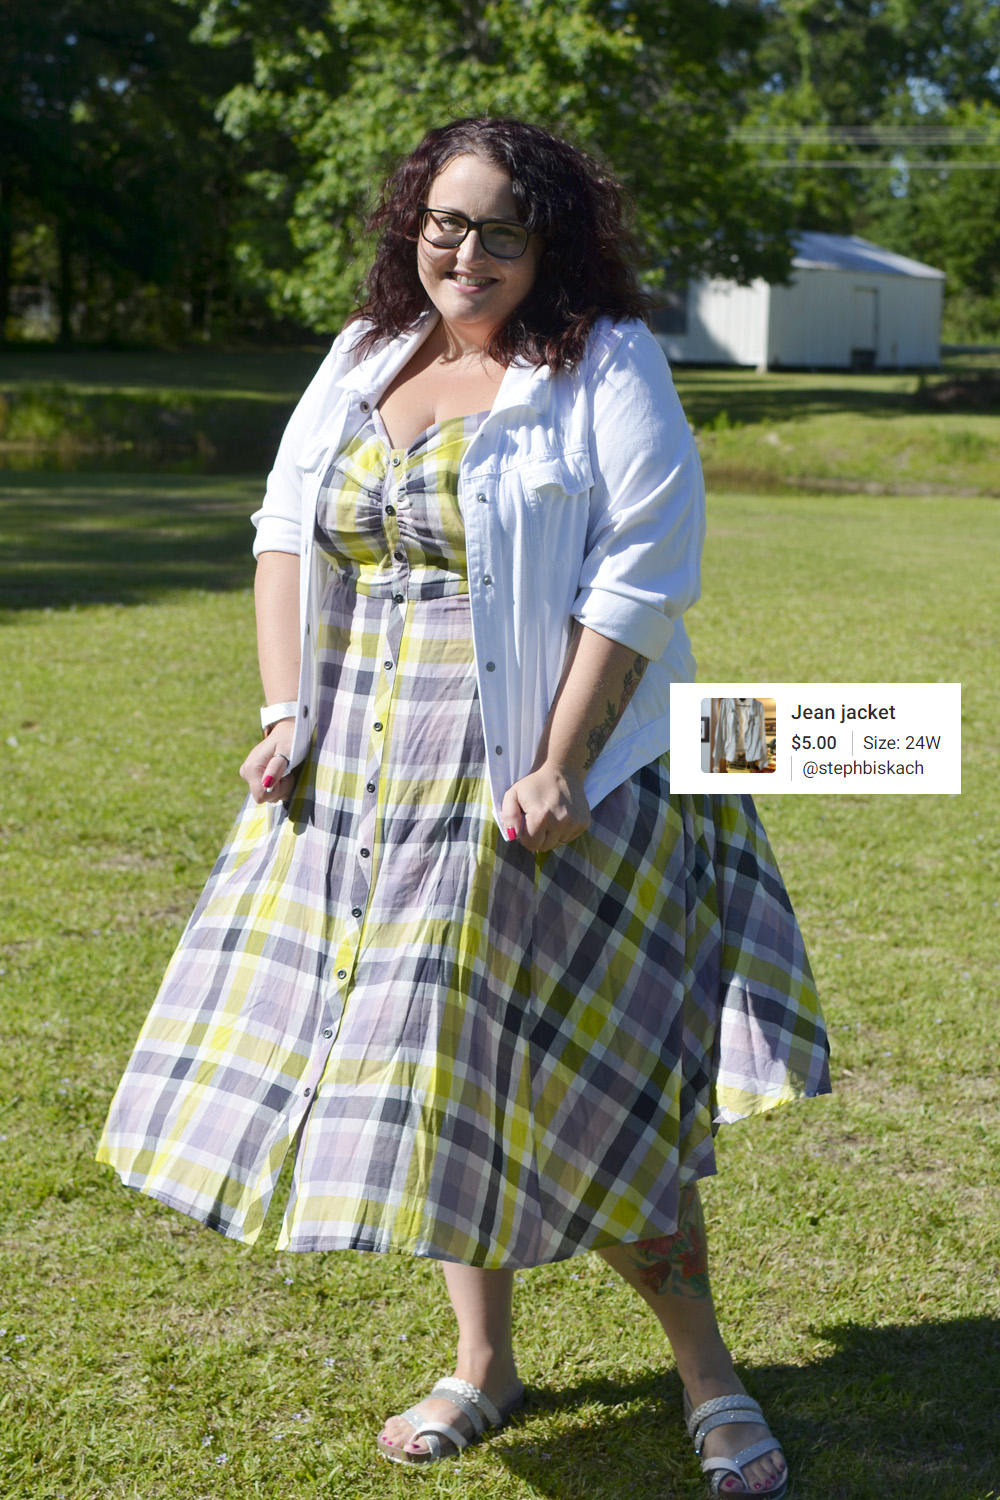 Maranda, a plus size woman, models Outfit of the Day with a white Lane Bryant denim jacket over plaid Torrid dress.